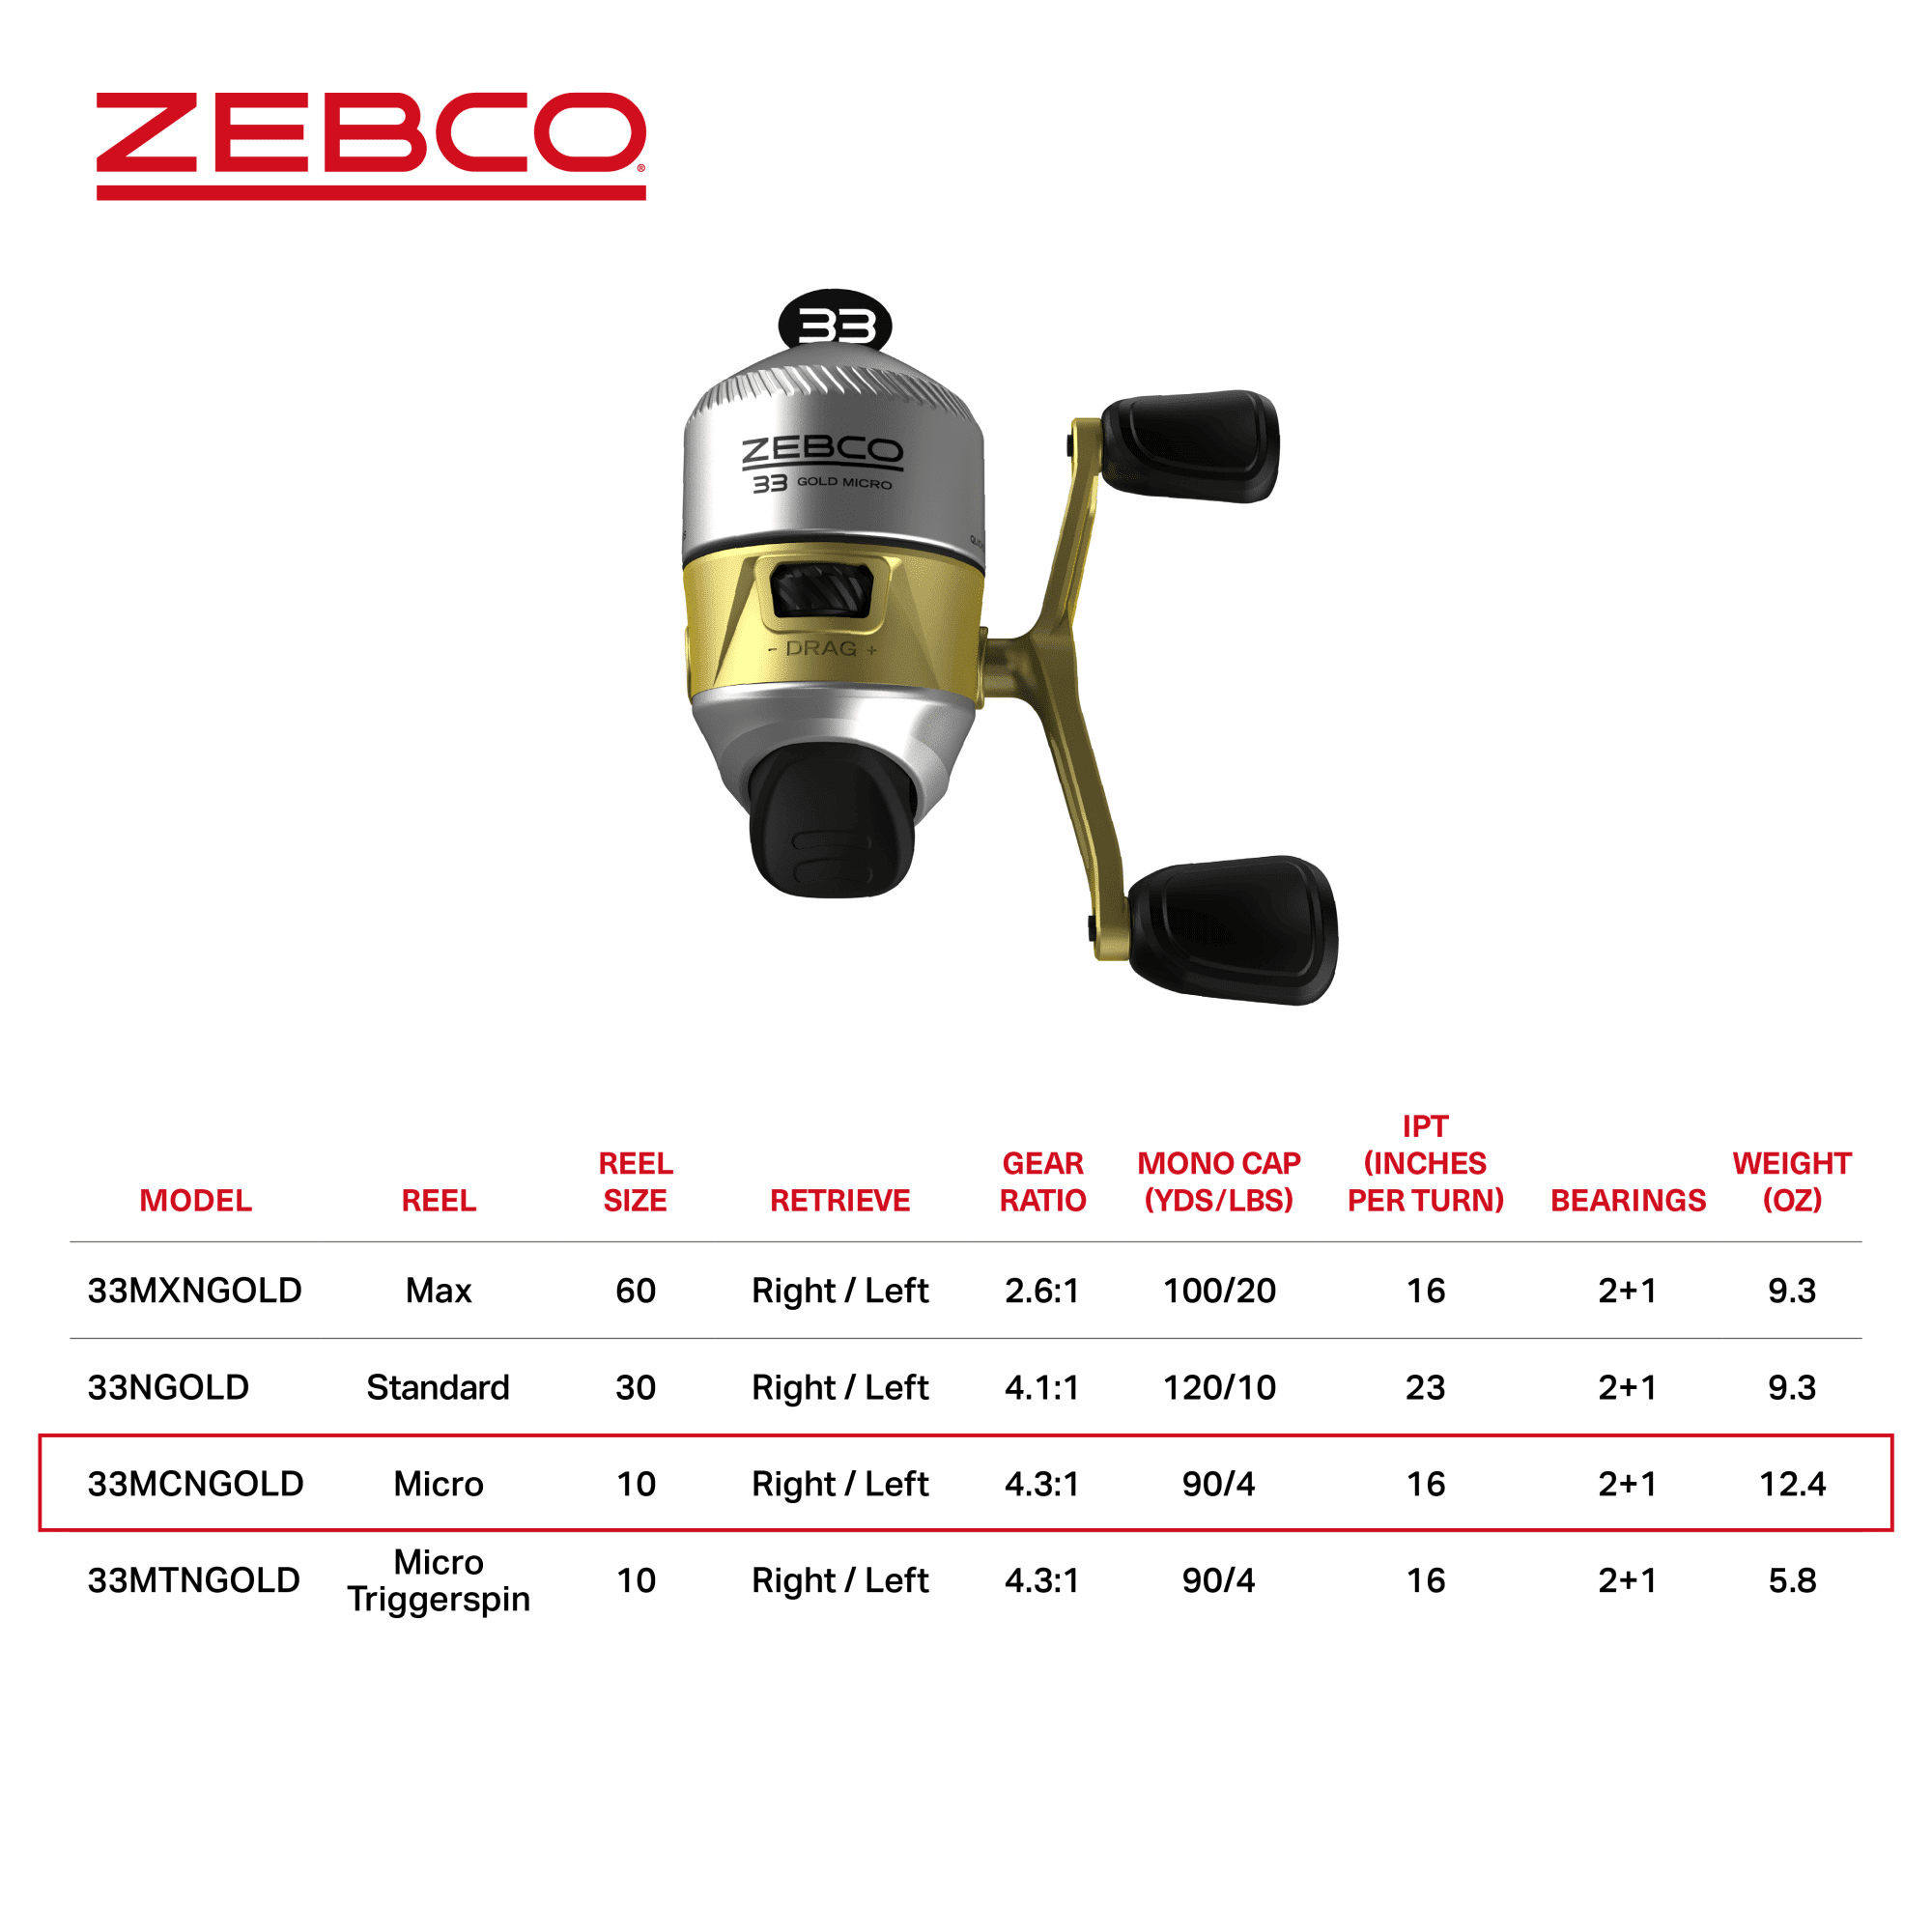 Zebco 33 Gold Micro Spincast Fishing Reel, Size 10 Reel, Silver